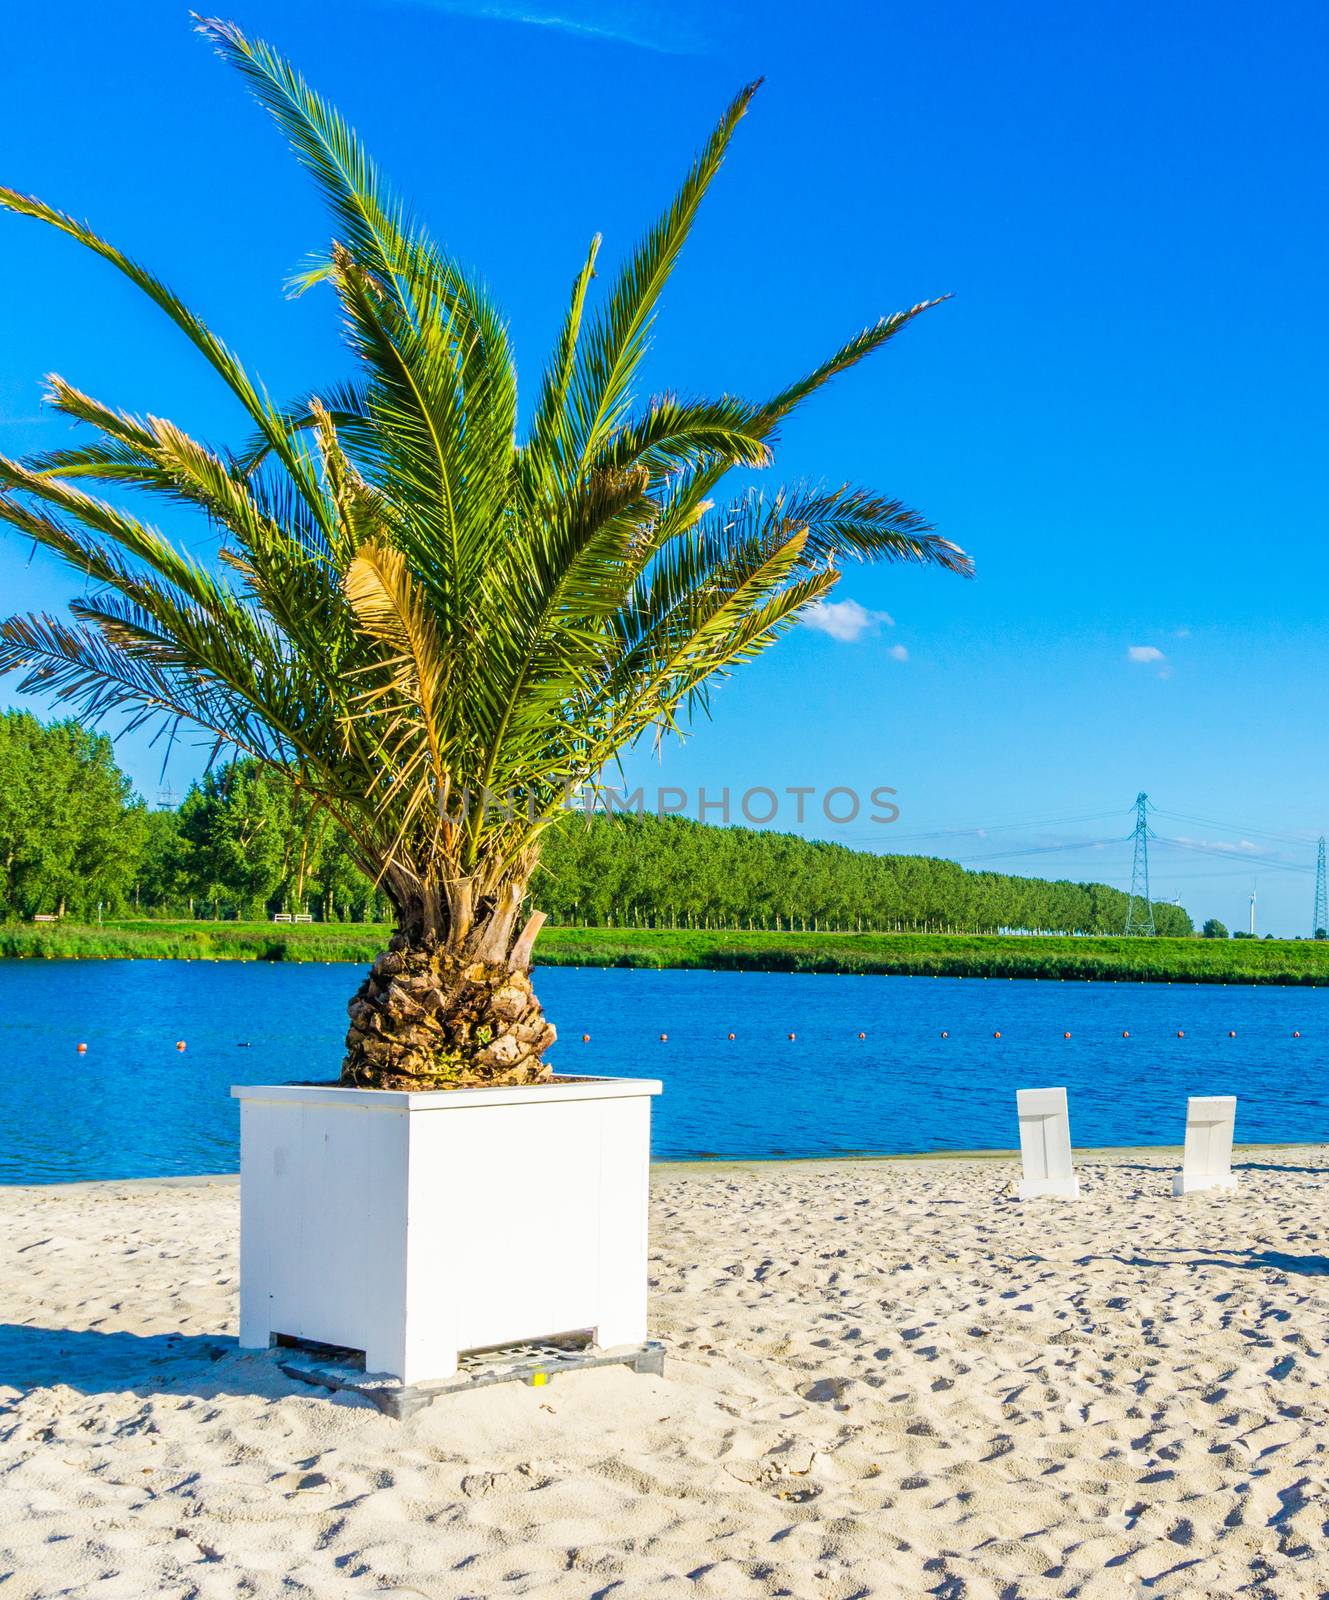 palm tree in a planter at a beach resort at a lake landscape